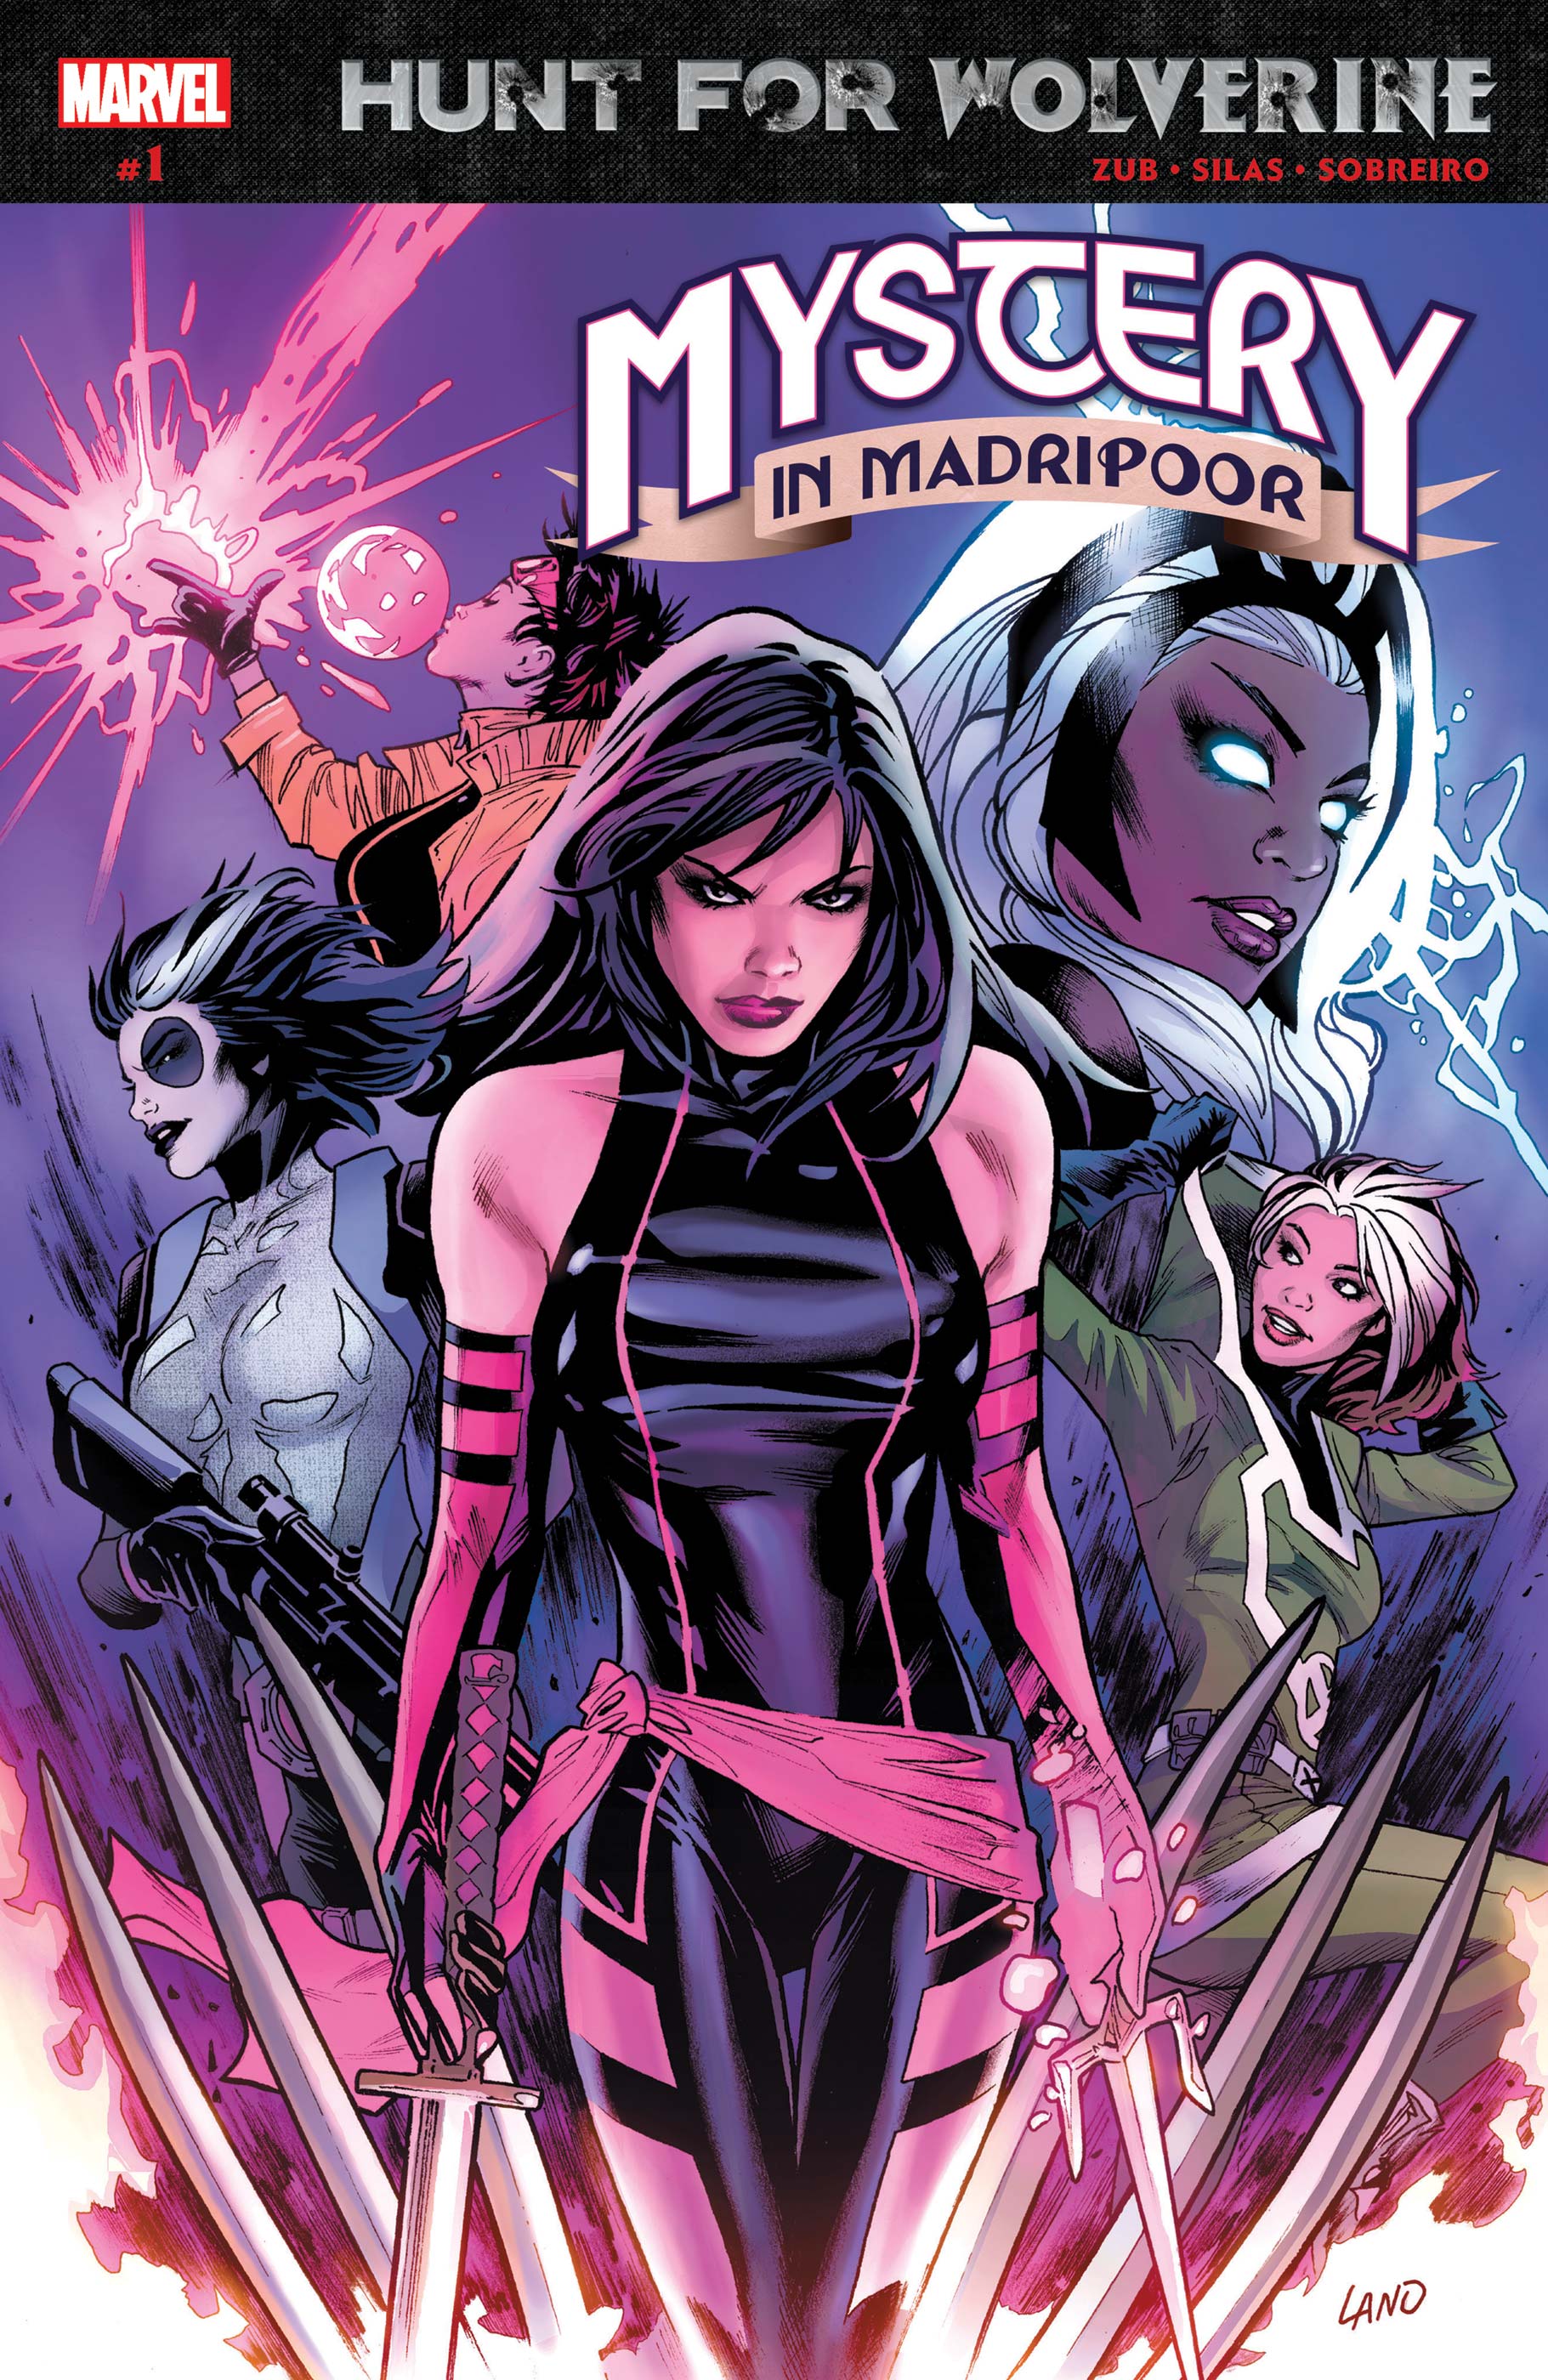 Hunt for Wolverine: Mystery in Madripoor (2018) #1